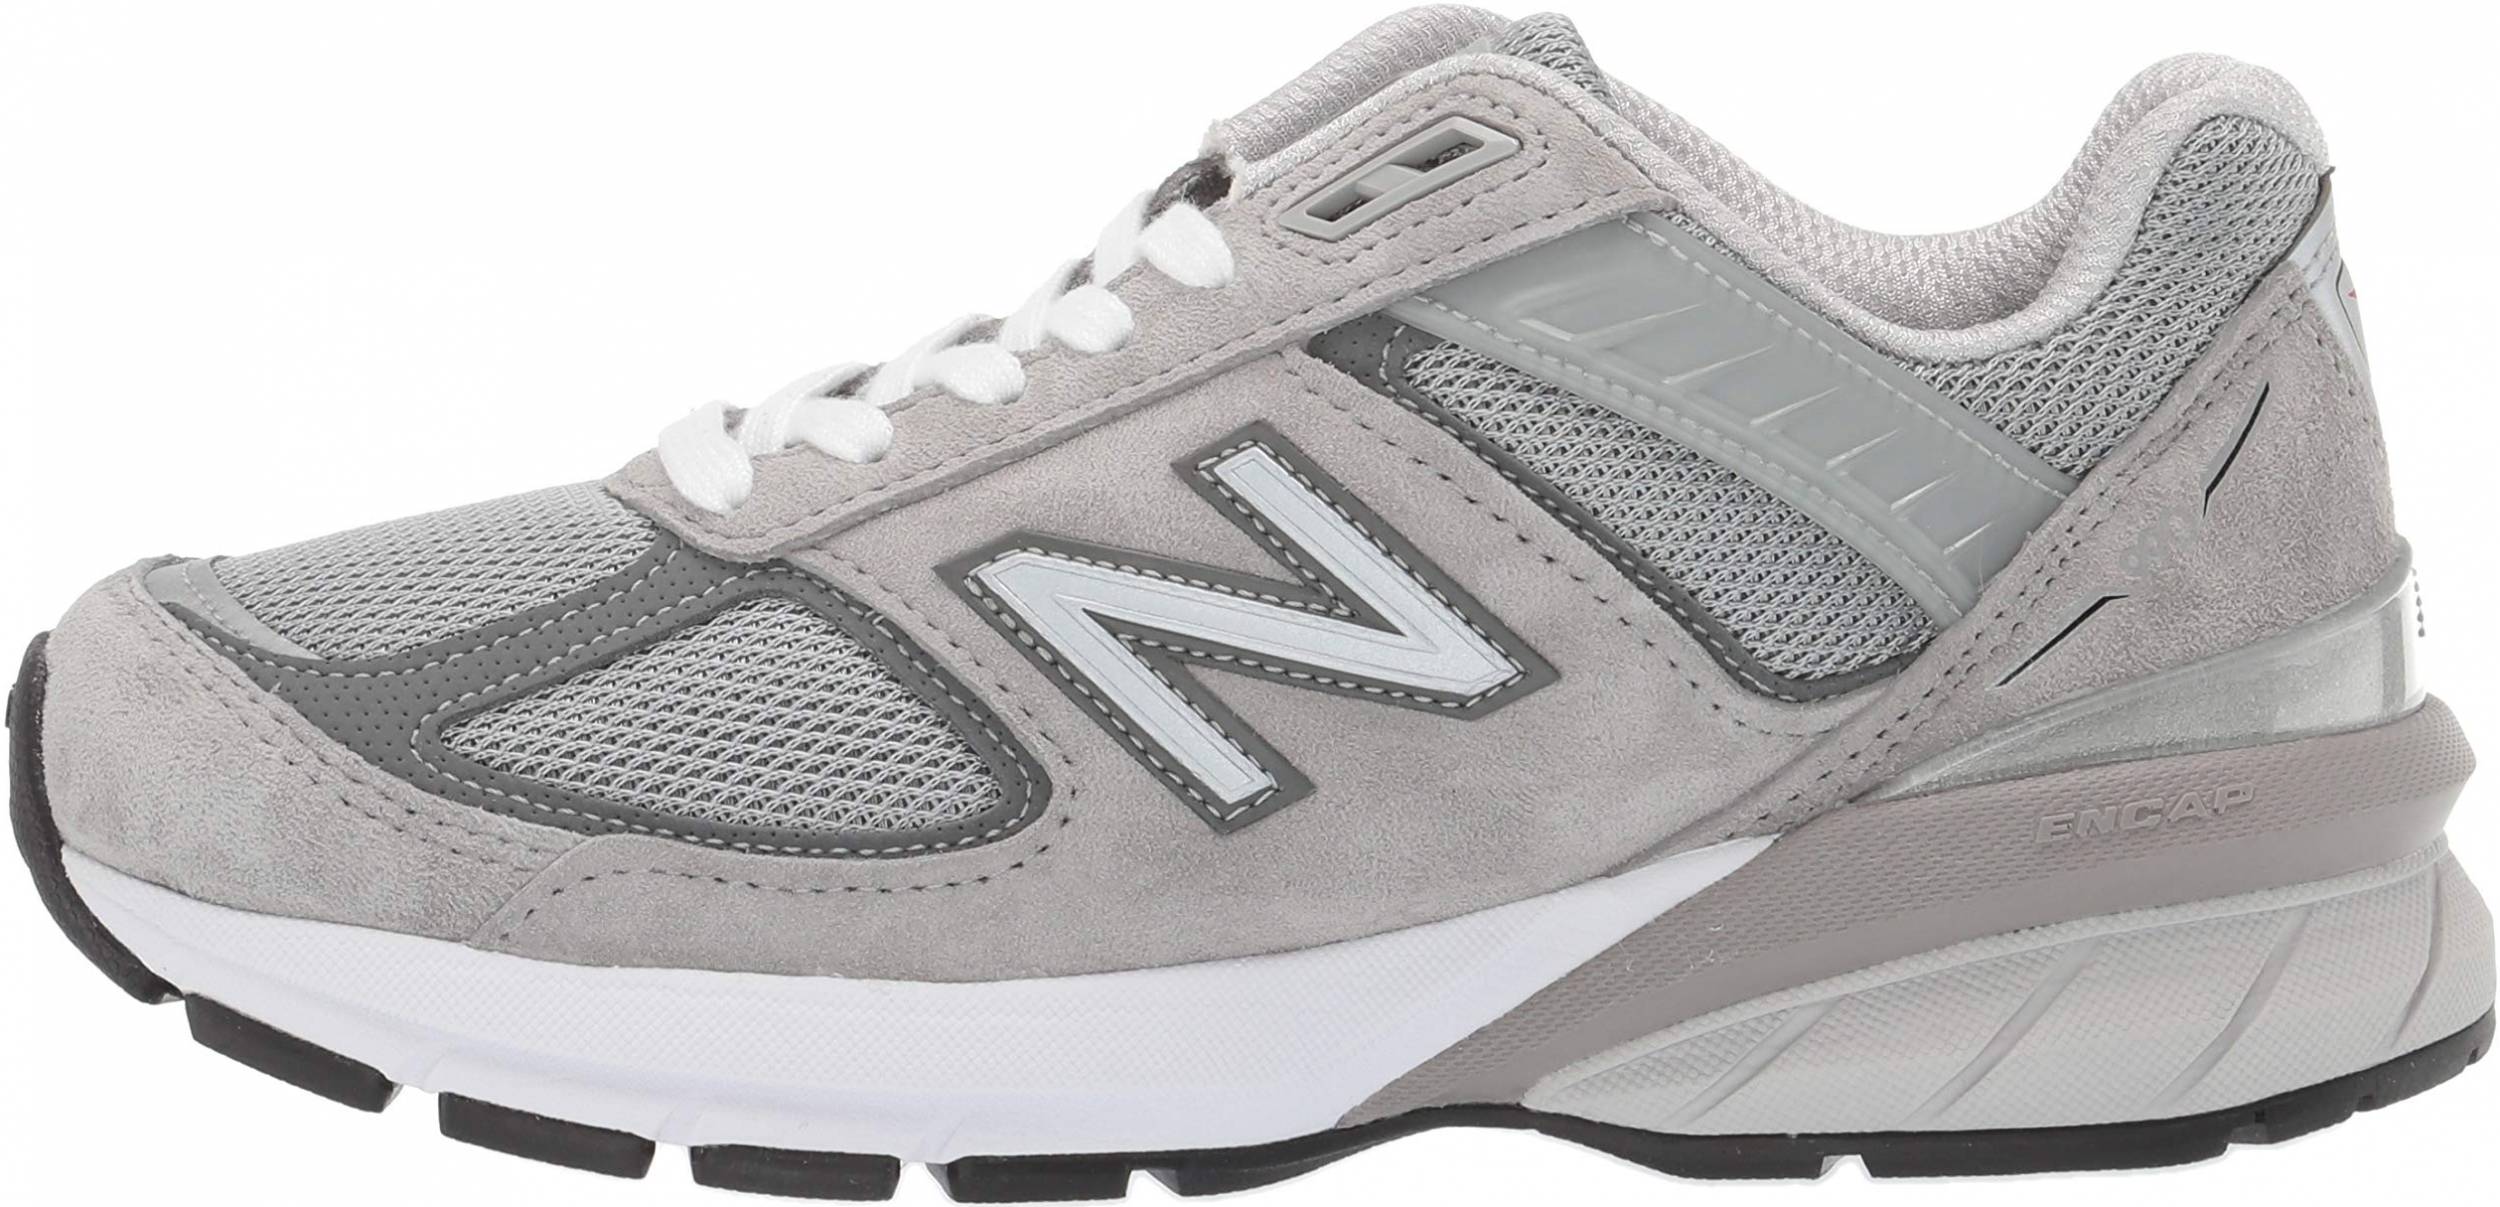 New Balance 990 v5 sneakers in 8 colors | RunRepeat